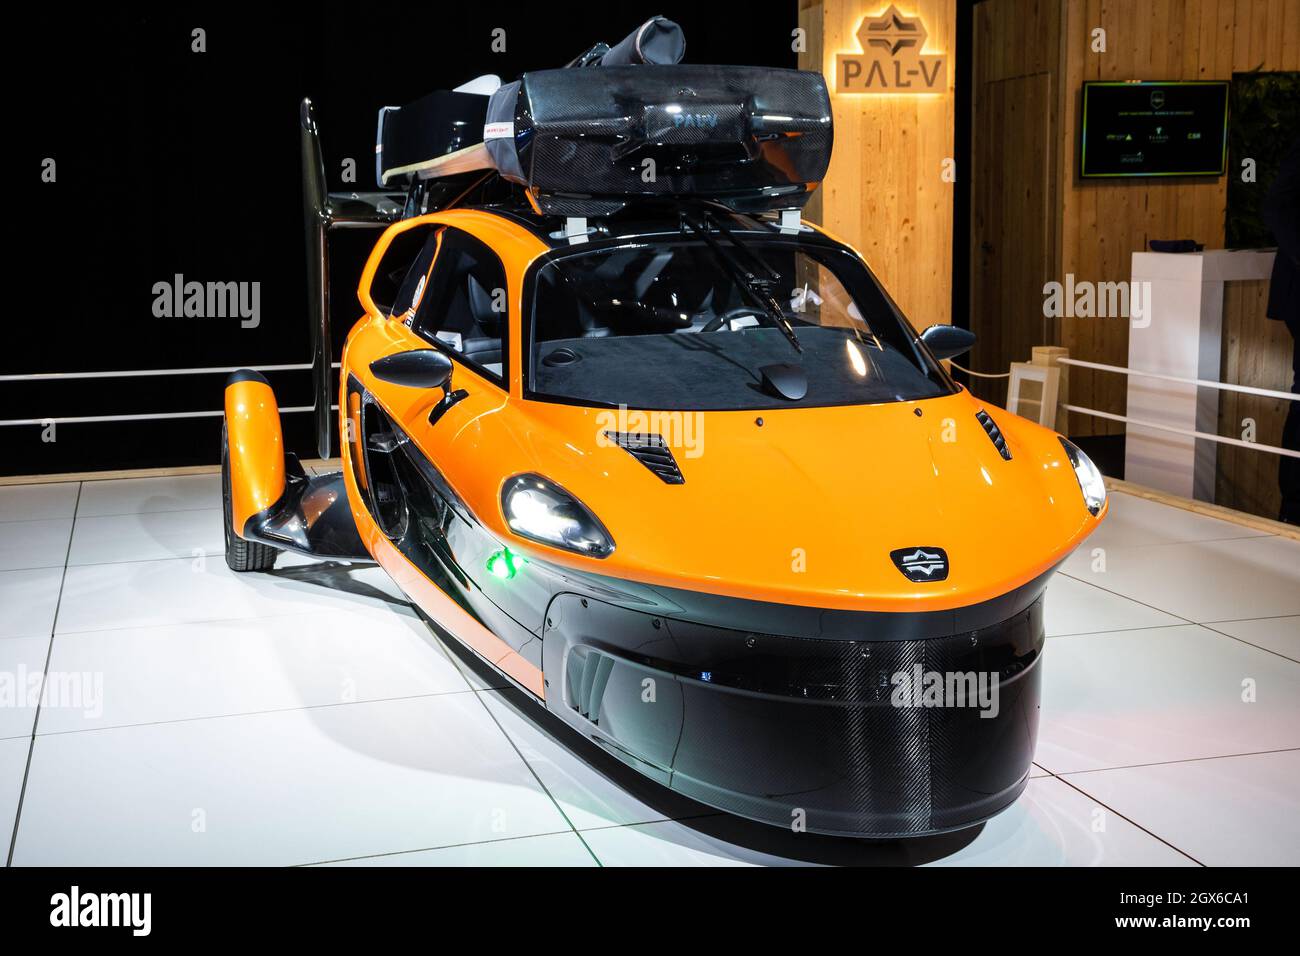 PAL-V Liberty flying car showcased at the Autosalon 2020 Motor Show. Brussels, Belgium - January 9, 2020. Stock Photo